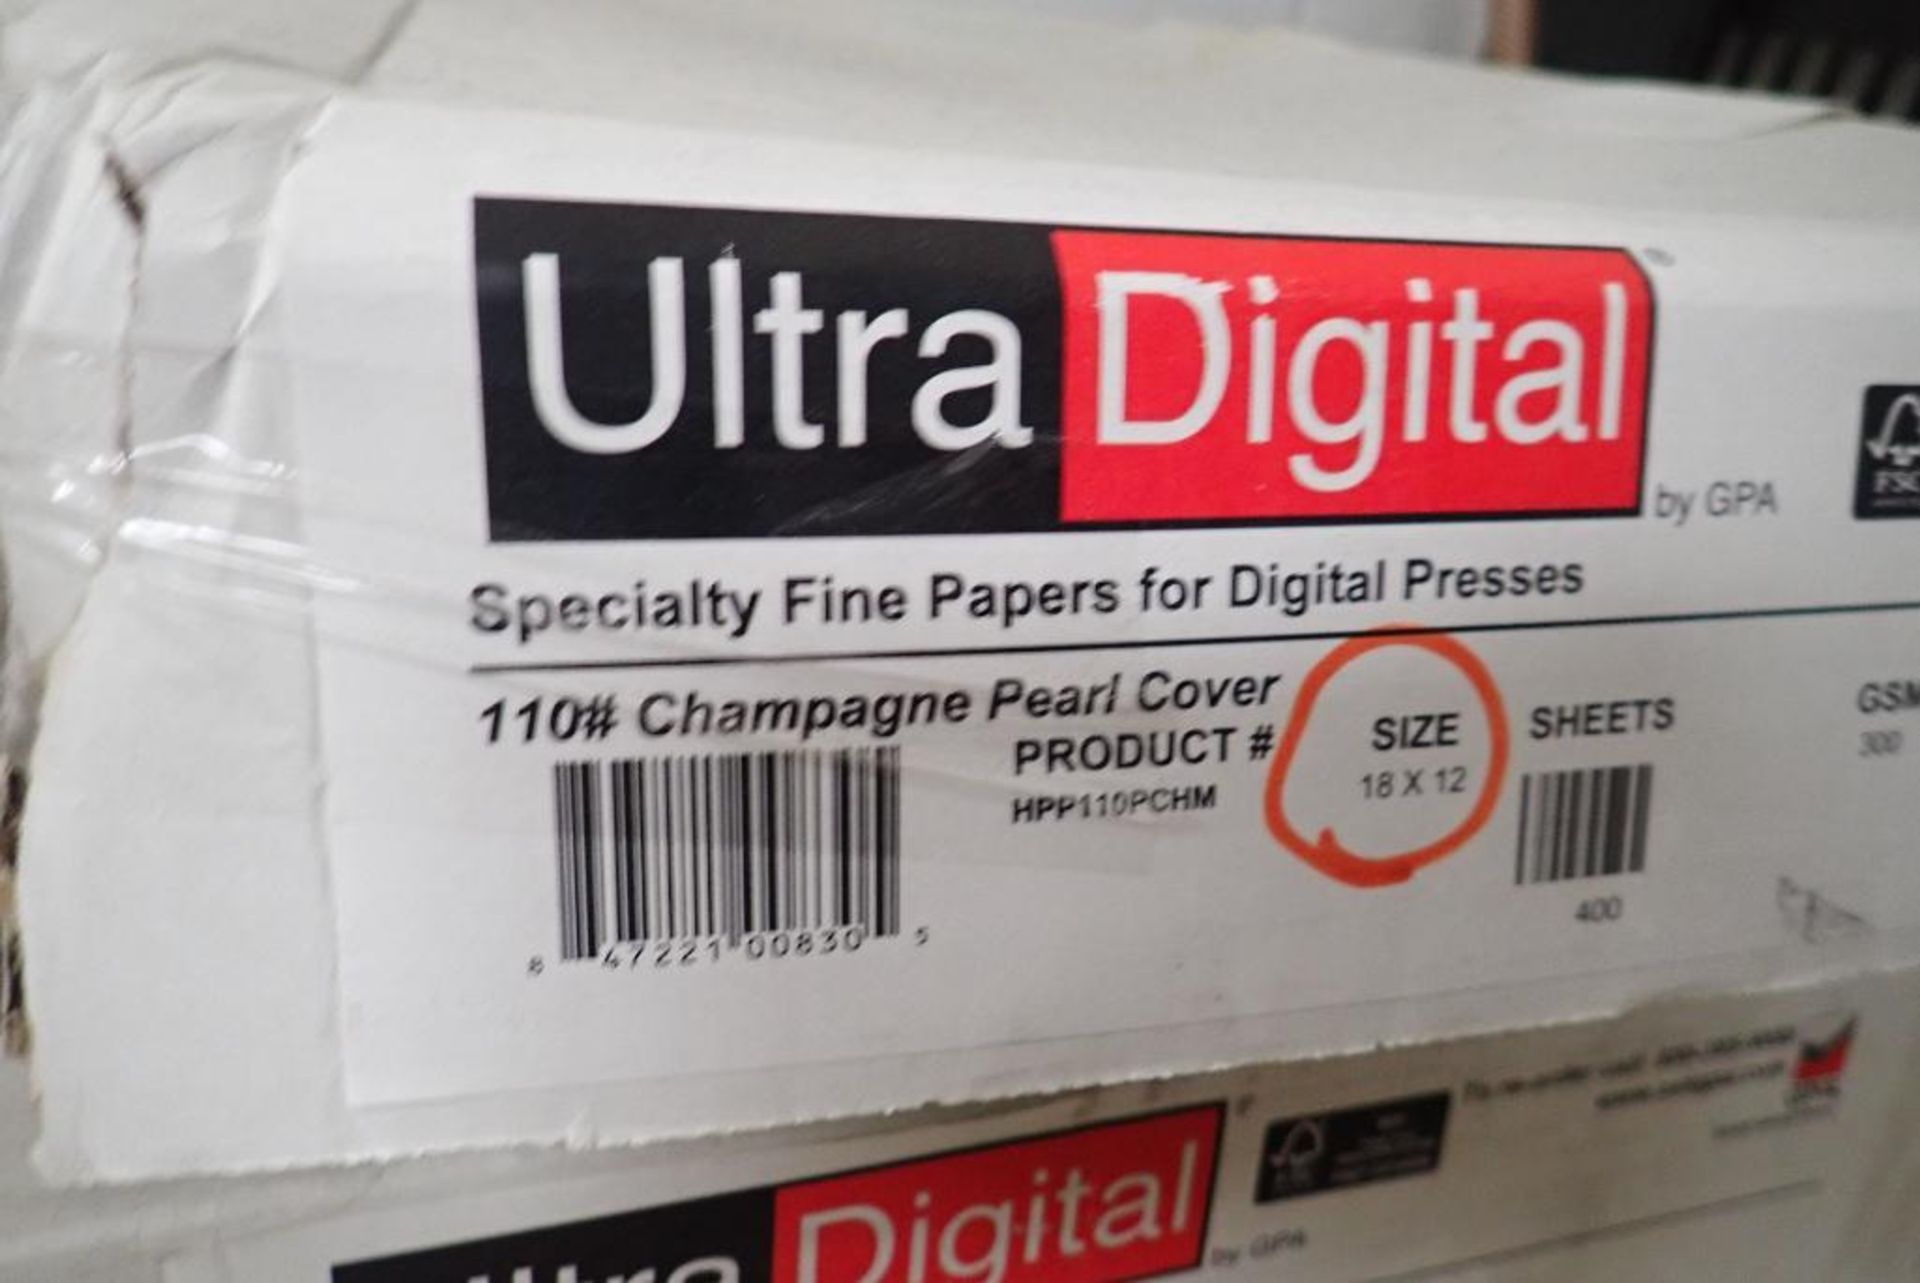 Lot of Approx. (12) Cases Asst. Size Ultra Digital Specialty Paper for Digital Presses. - Image 6 of 13